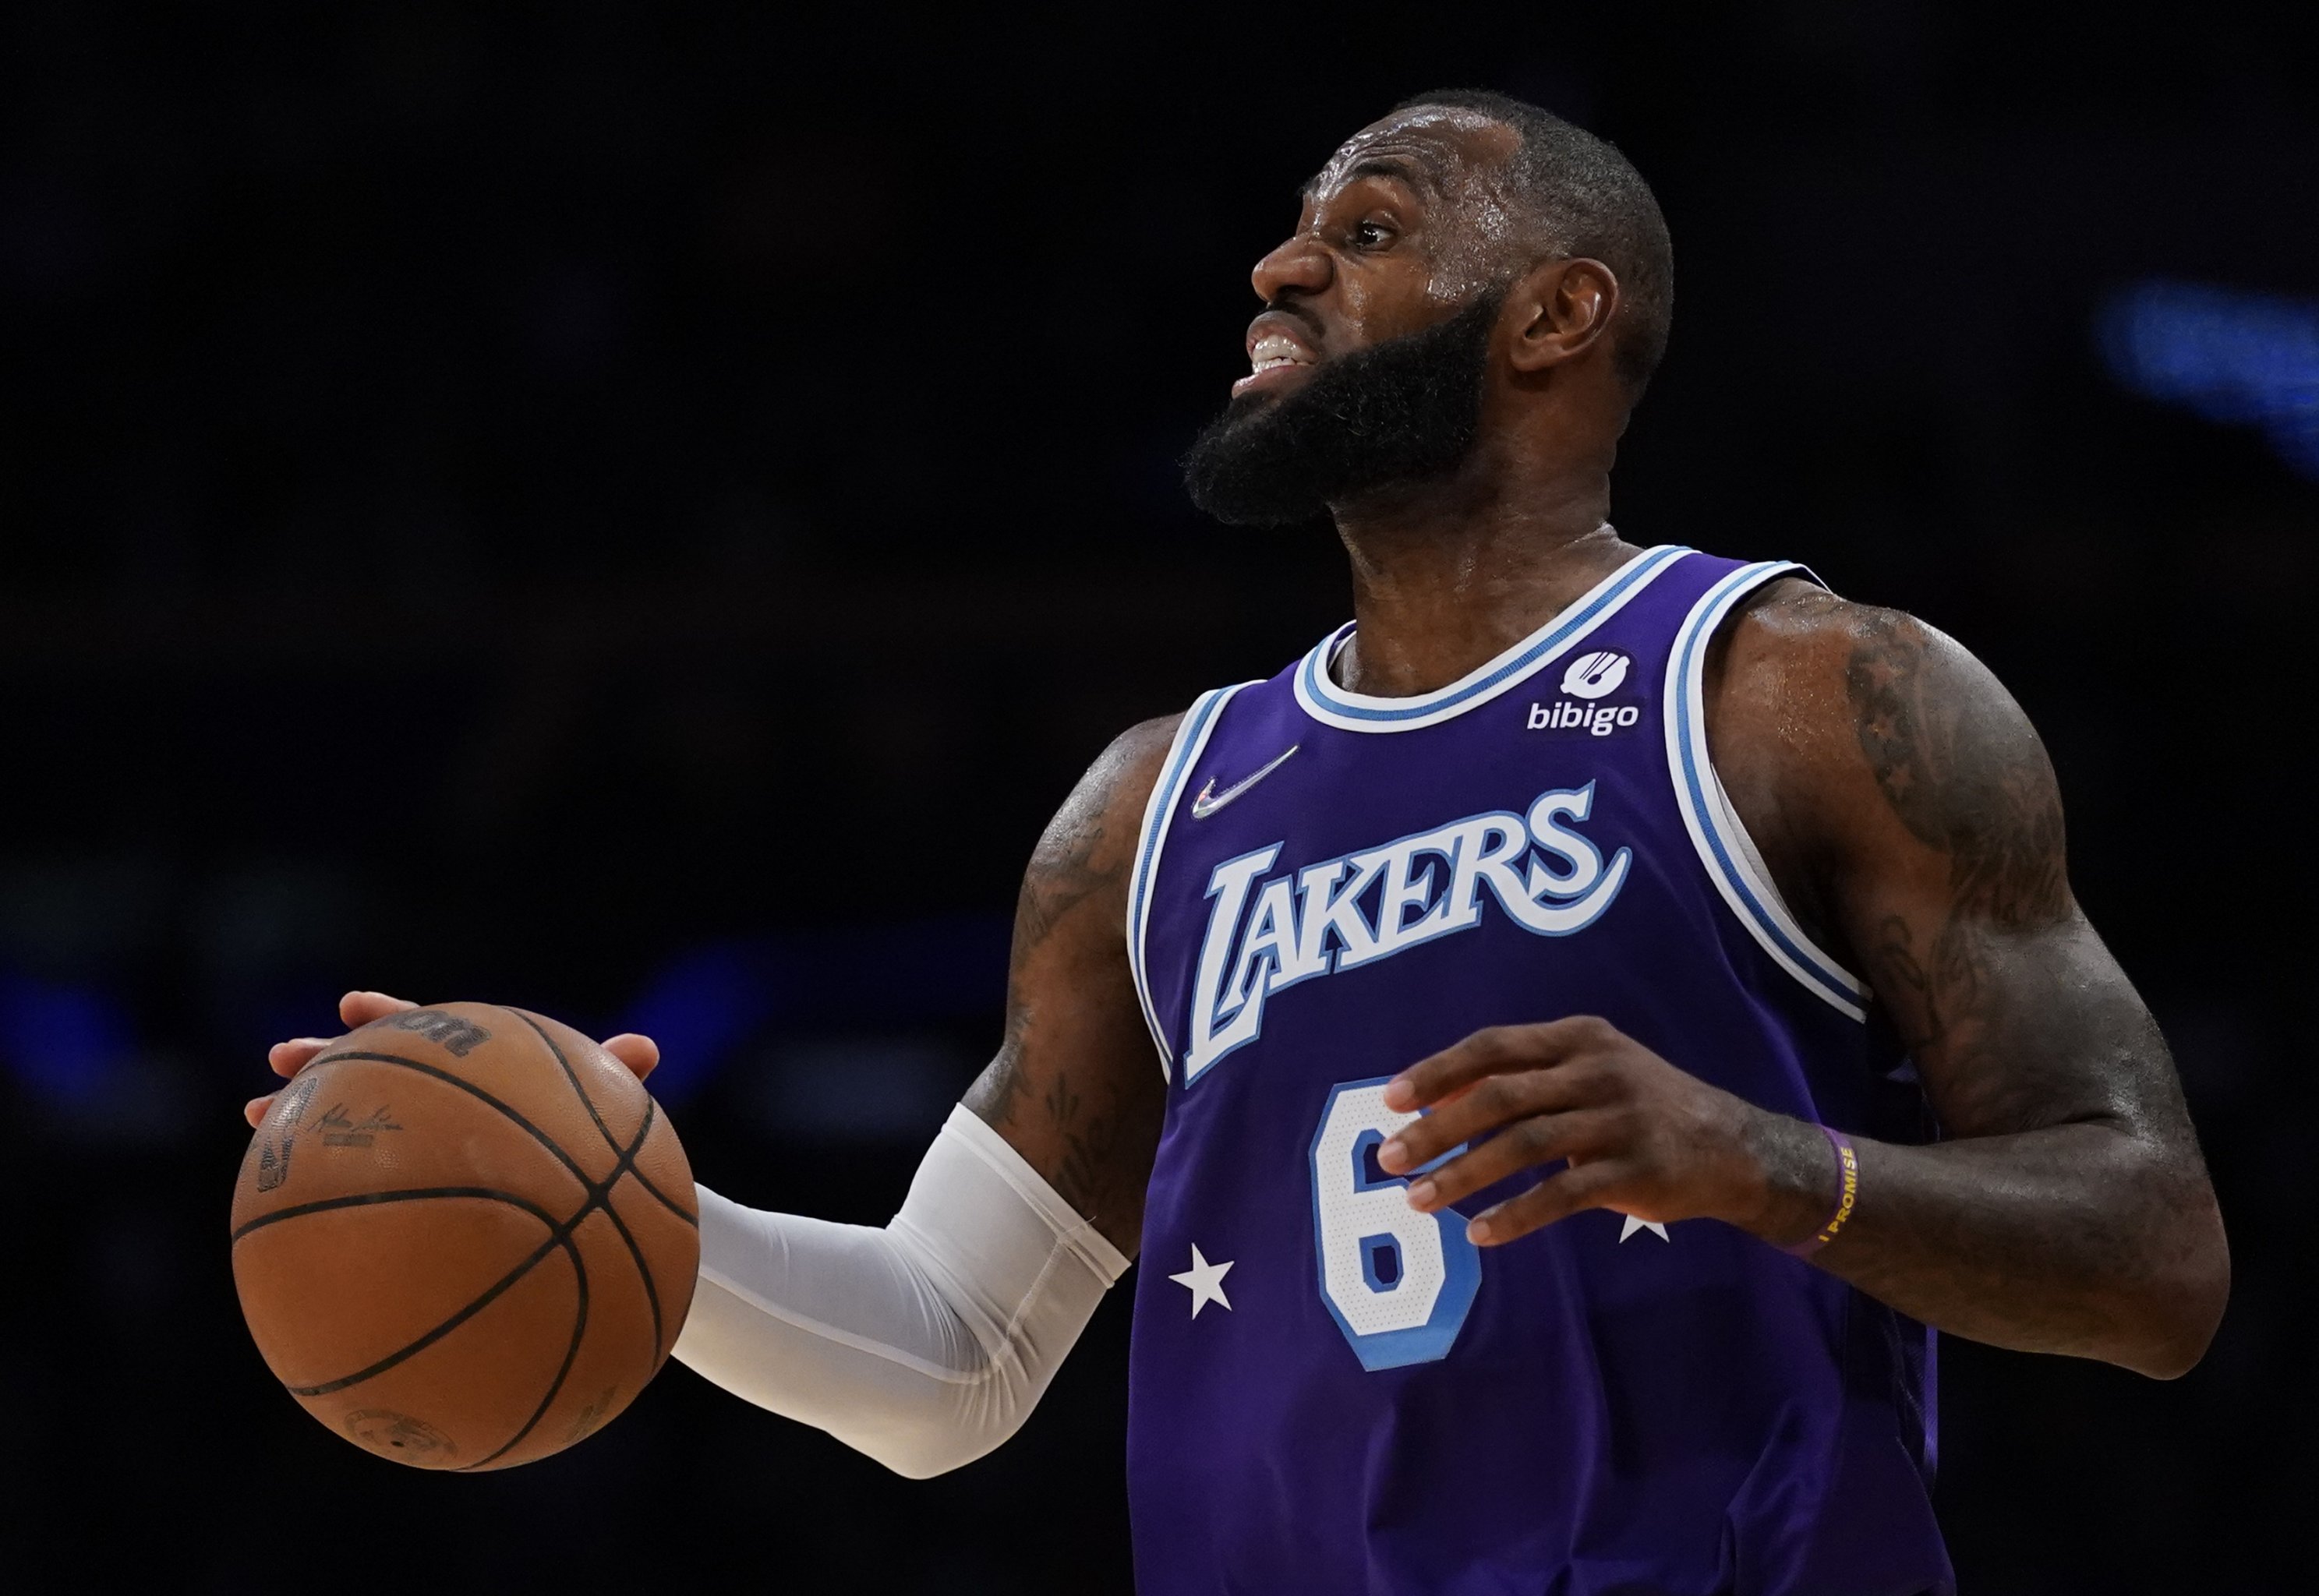 Report: Lakers looking to fill 2 positions to round out 2021-22